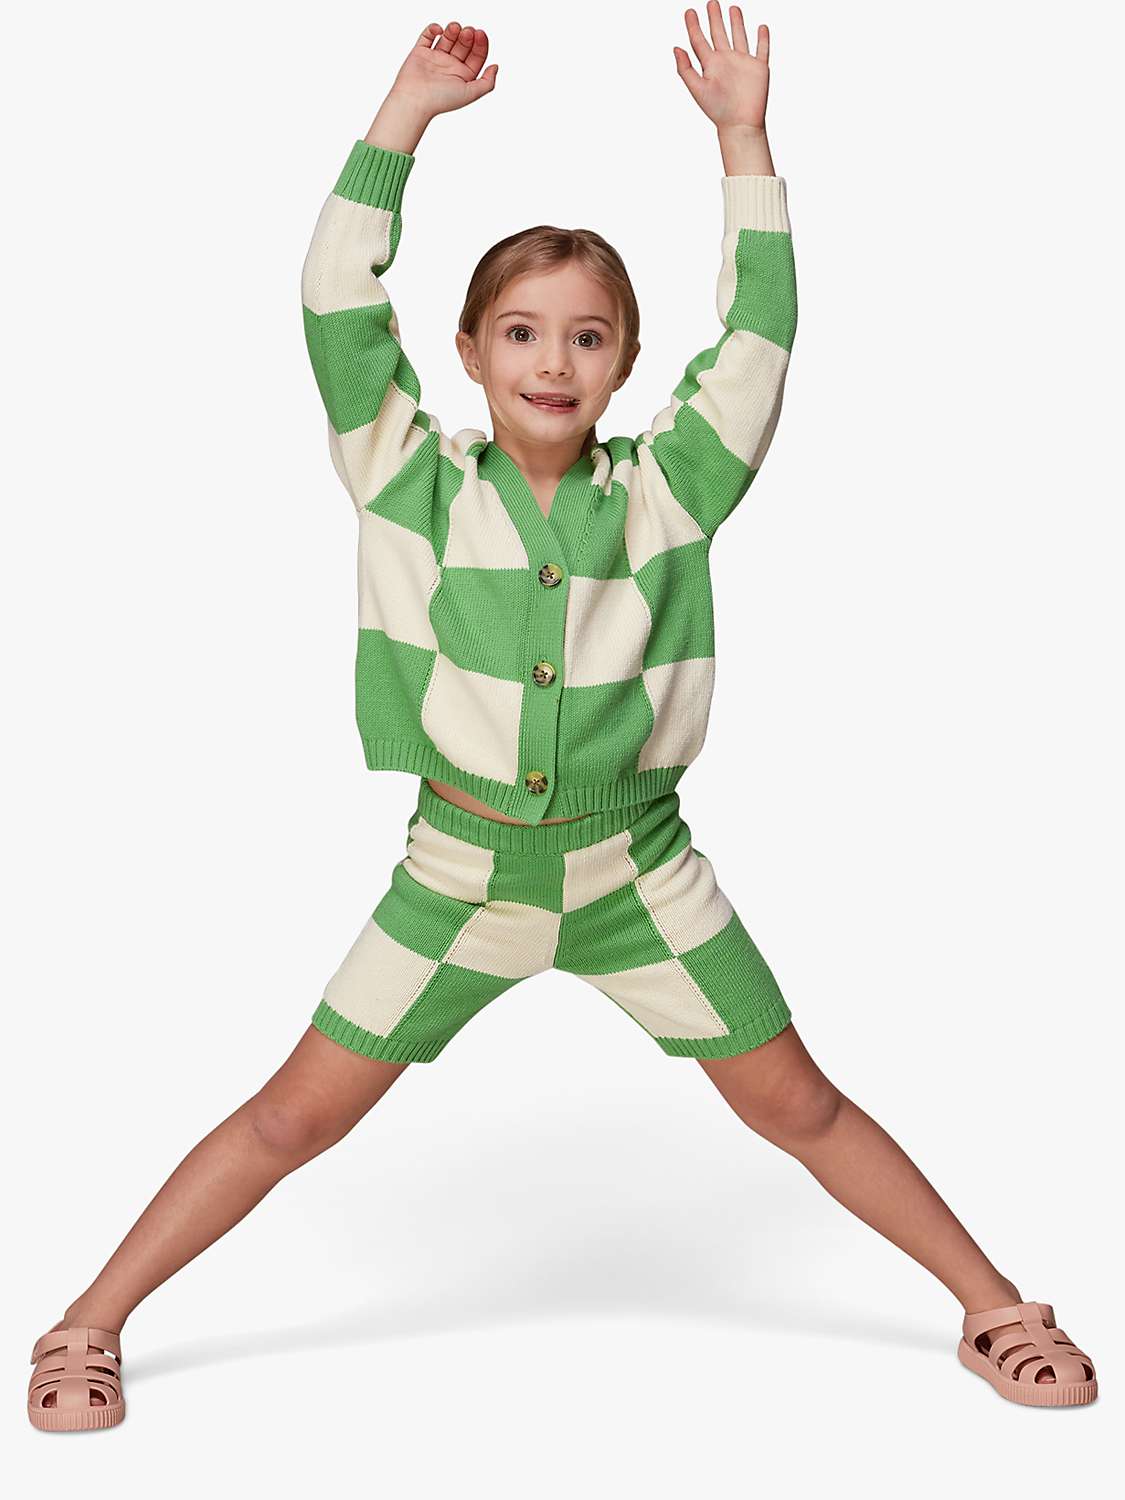 Buy Whistles Kids' Knitted Shorts, Green/Multi Online at johnlewis.com